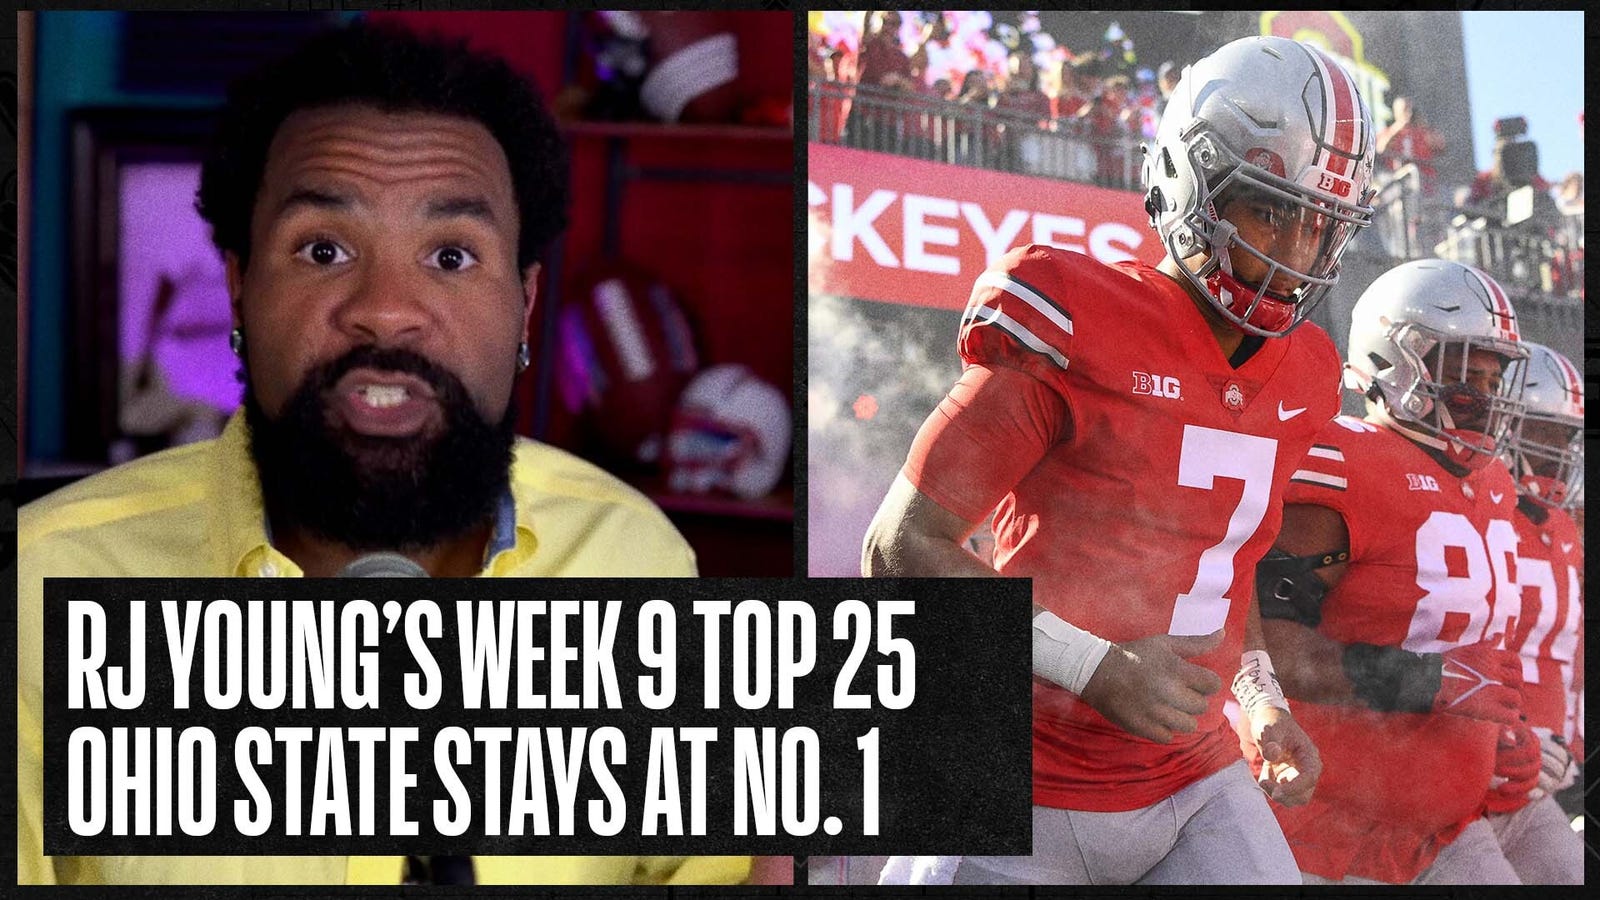 RJ Young's Week 9 Top 25: Ohio State stays at No. 1